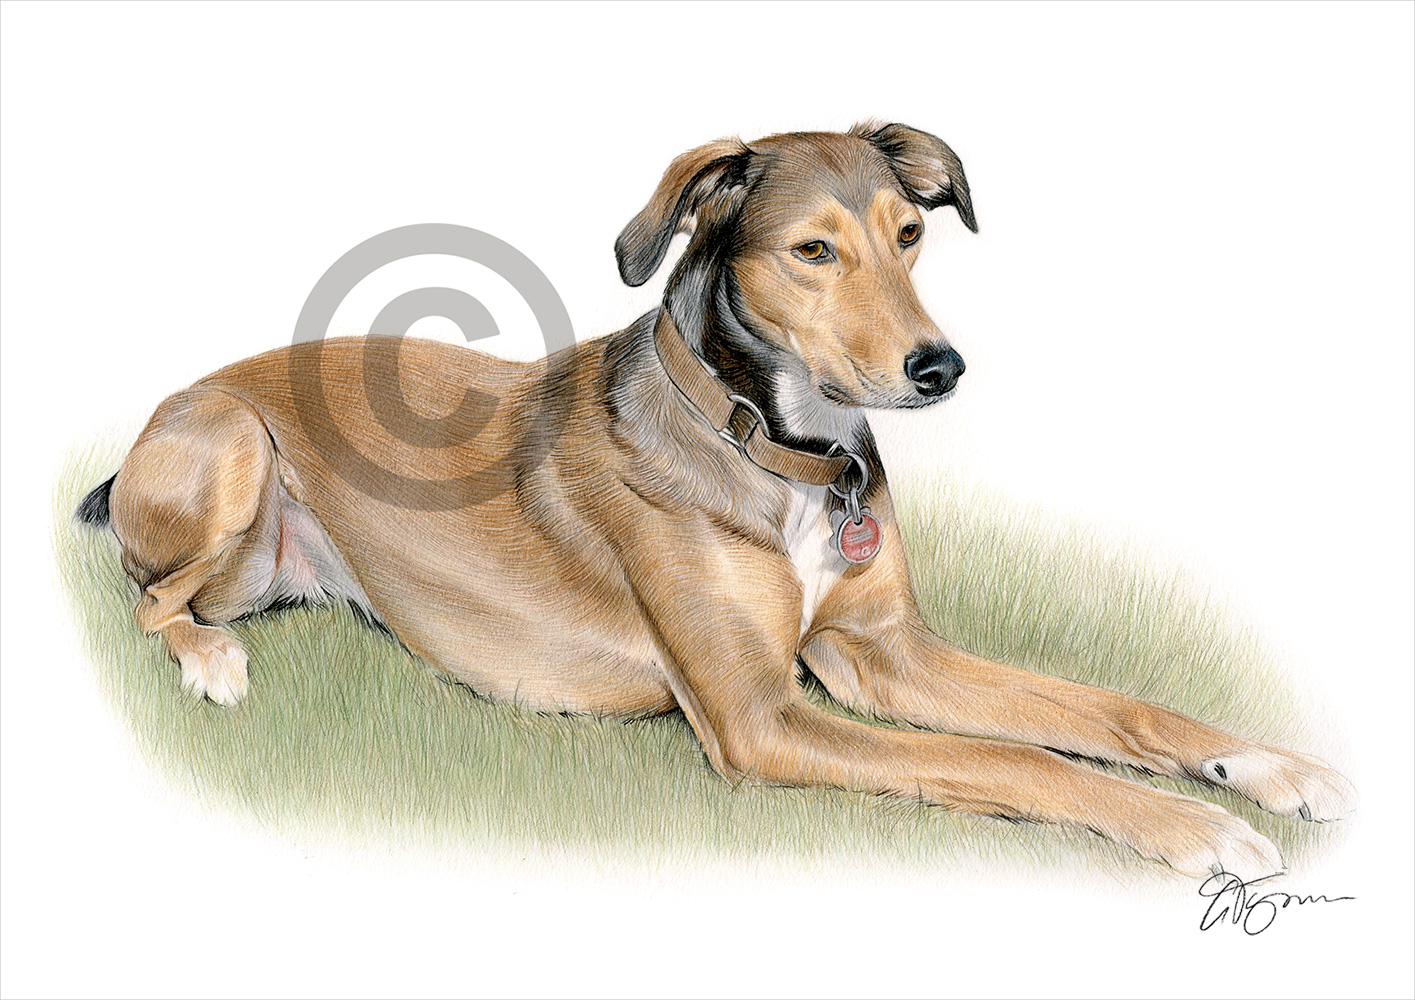 Pencil drawing commission of a brown dog in colour by artist Gary Tymon